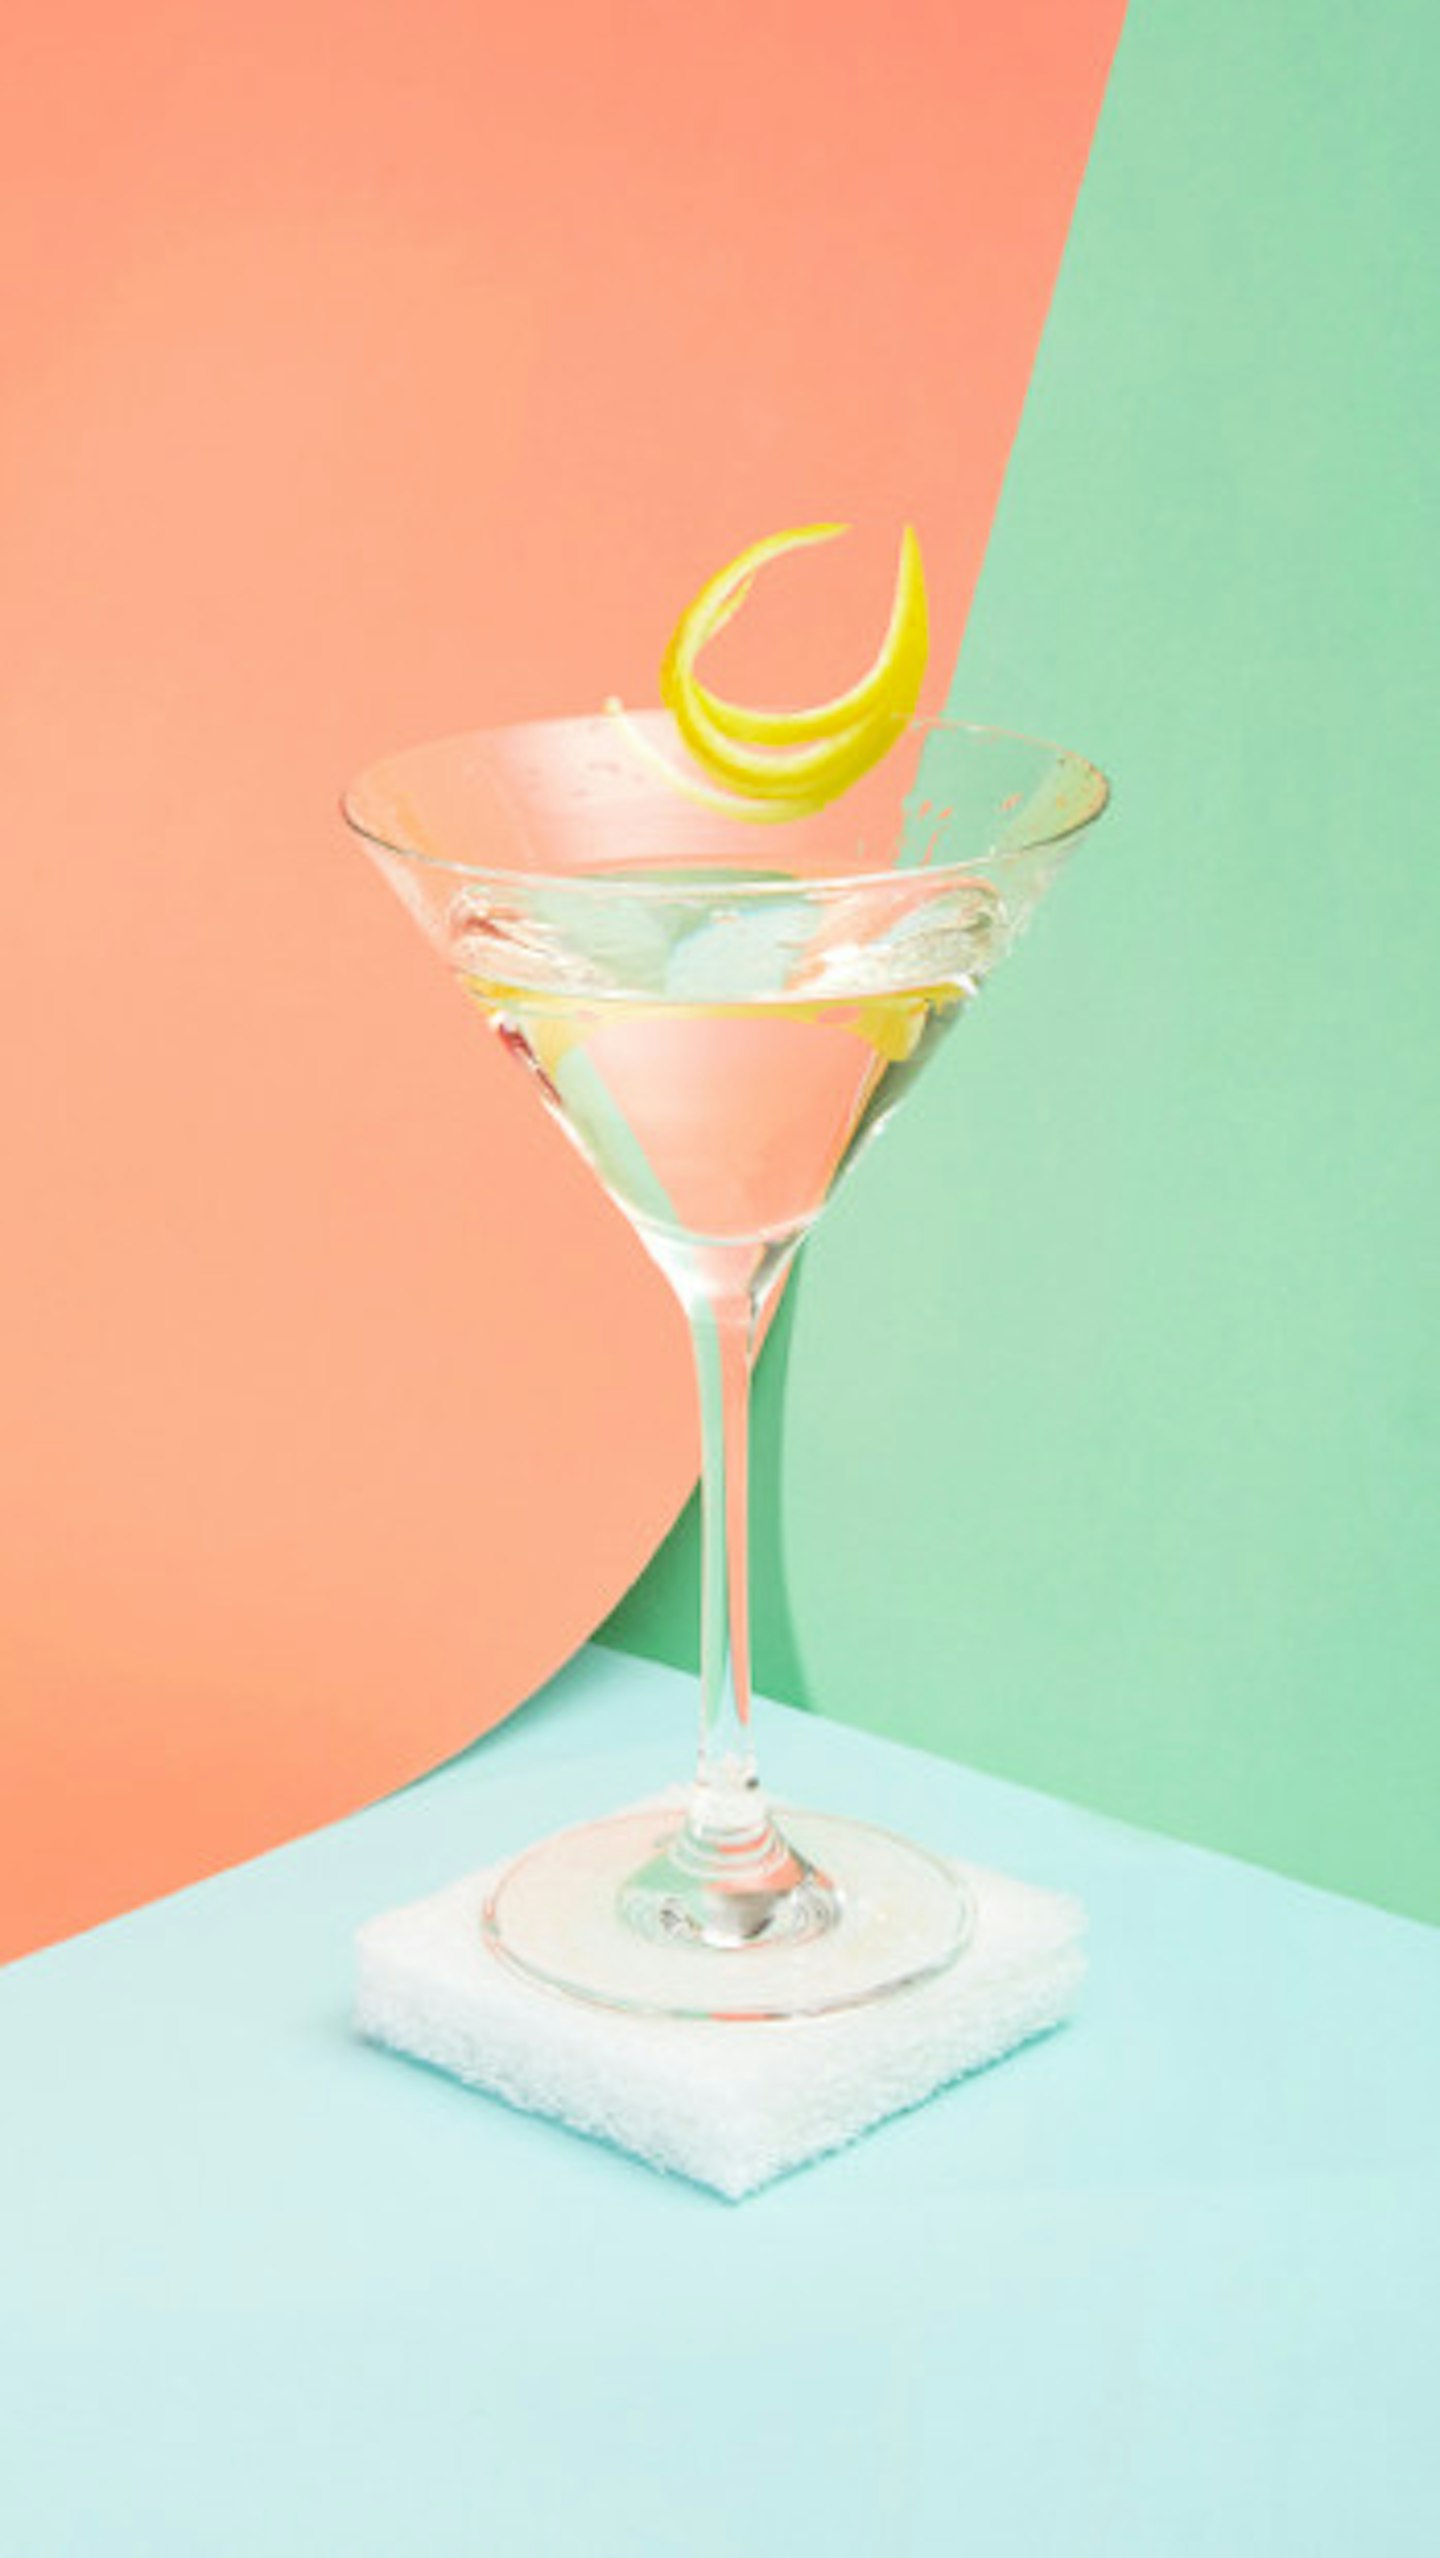 The Party Starter One - The Vodka Martini